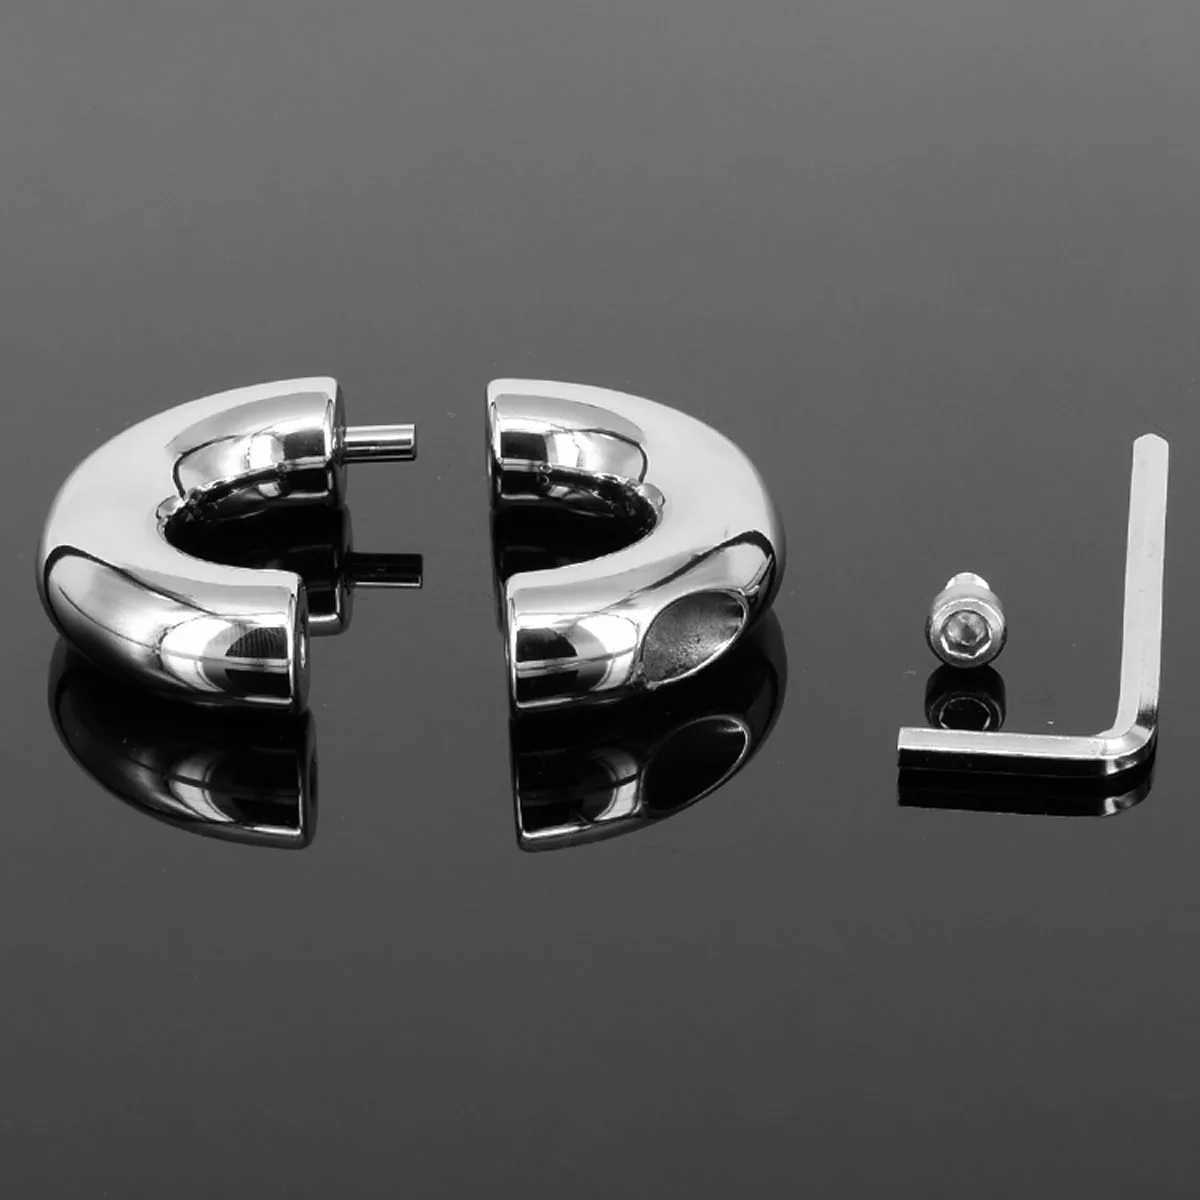 Nxy Cockrings Metal Male Cockring Clamp Chastity Cage Adult Sex Toys Screws Penis Ring Bondocage Scrotum Dick Strenter Cock Delay for Men 240427